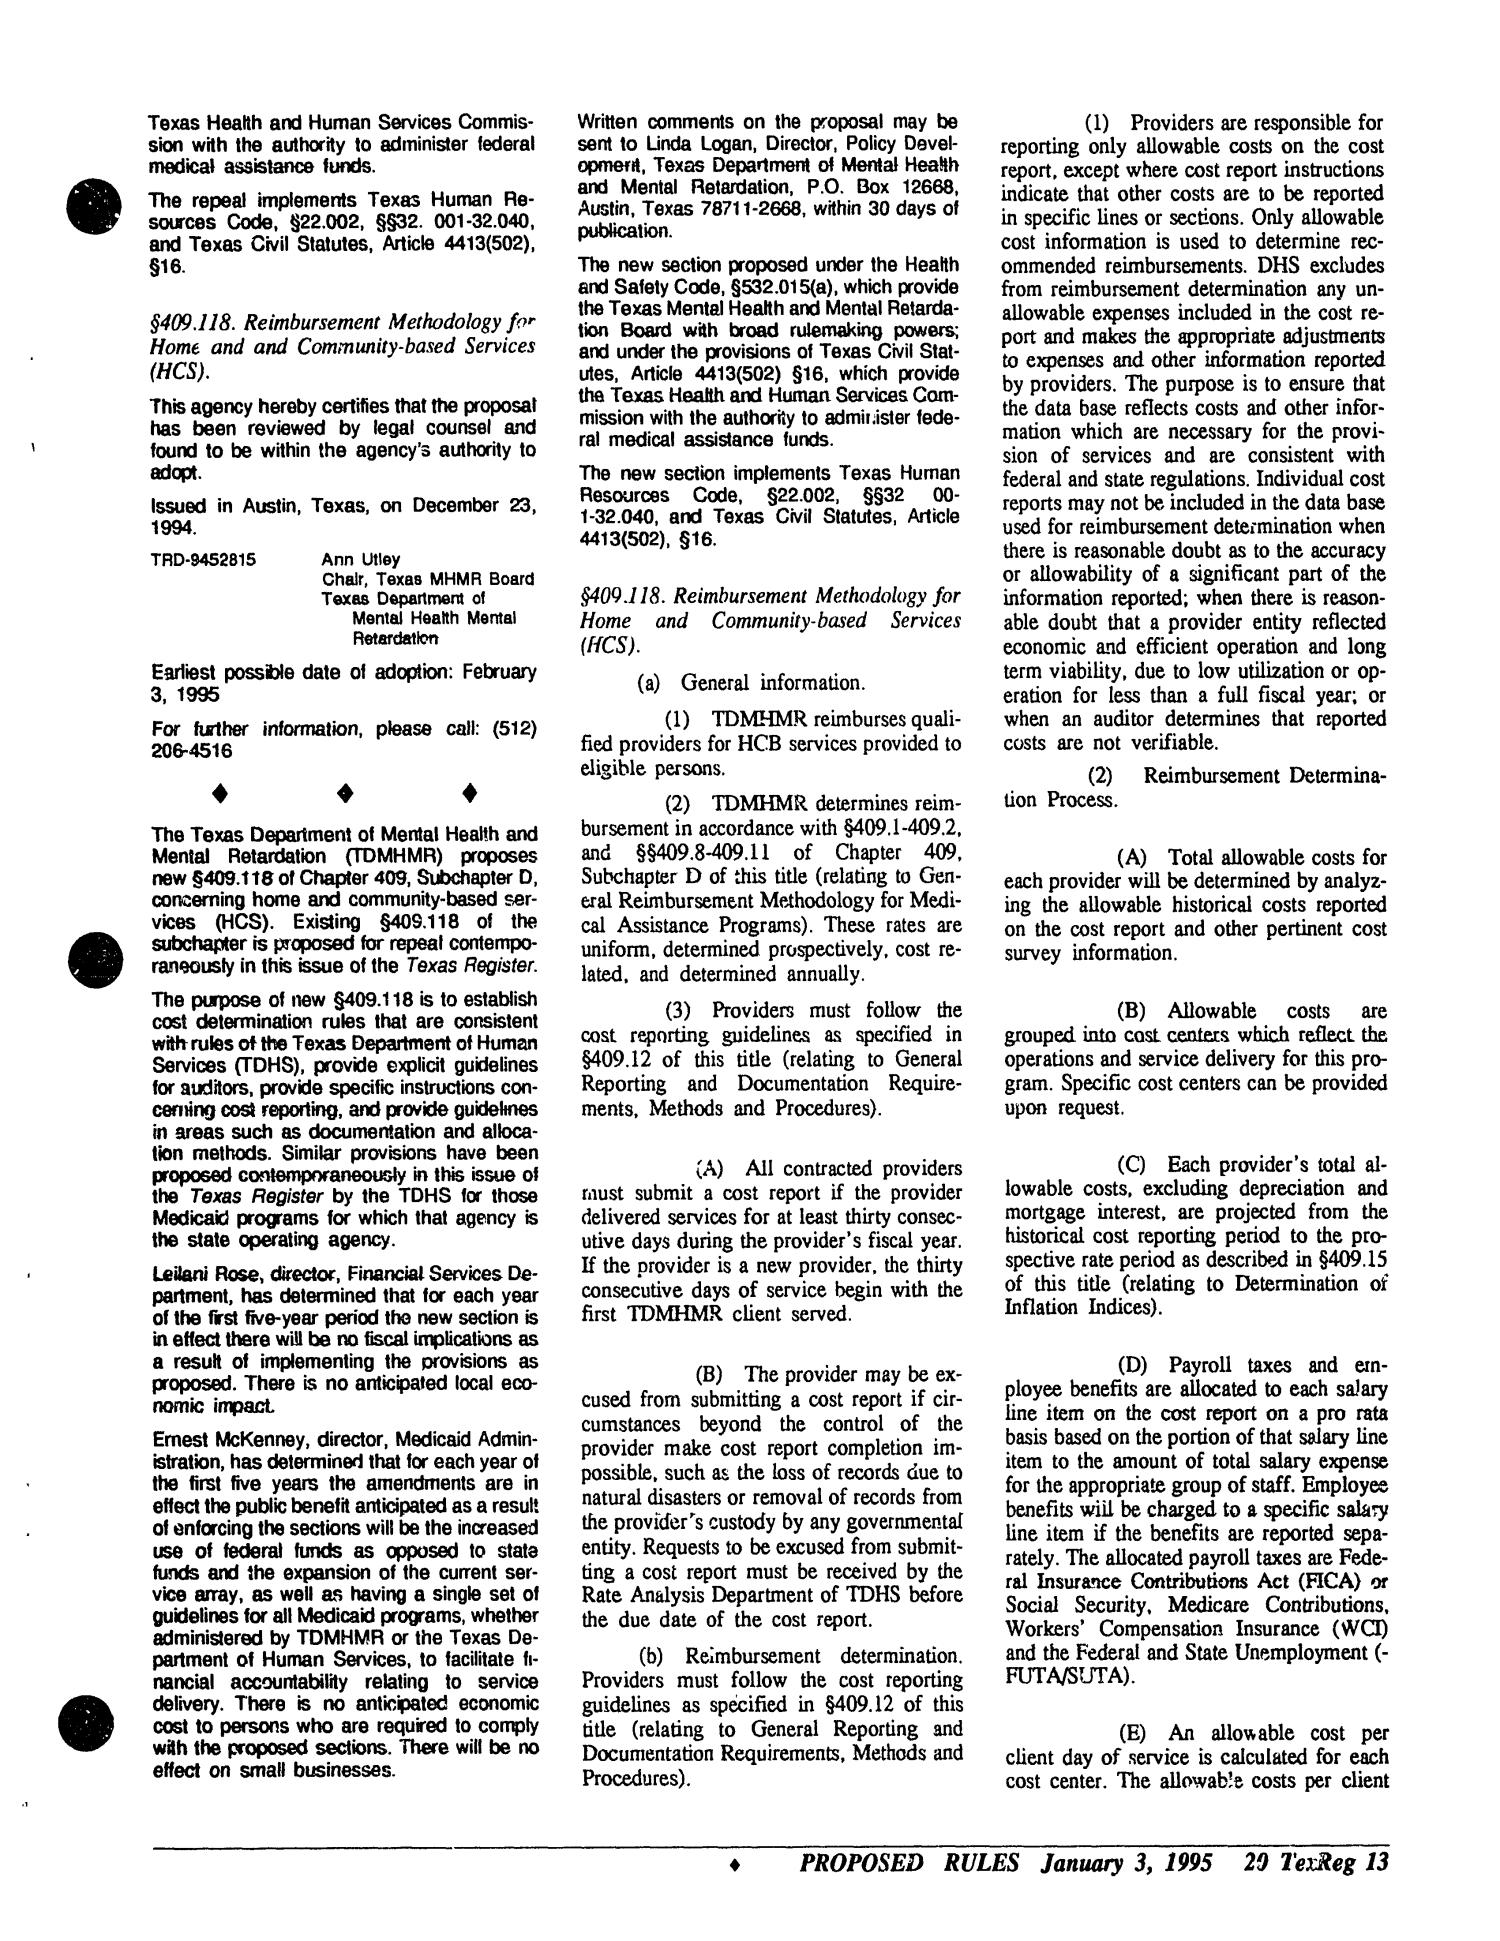 Texas Register, Volume 20, Number 1, Pages 1-46, January 3, 1995
                                                
                                                    13
                                                